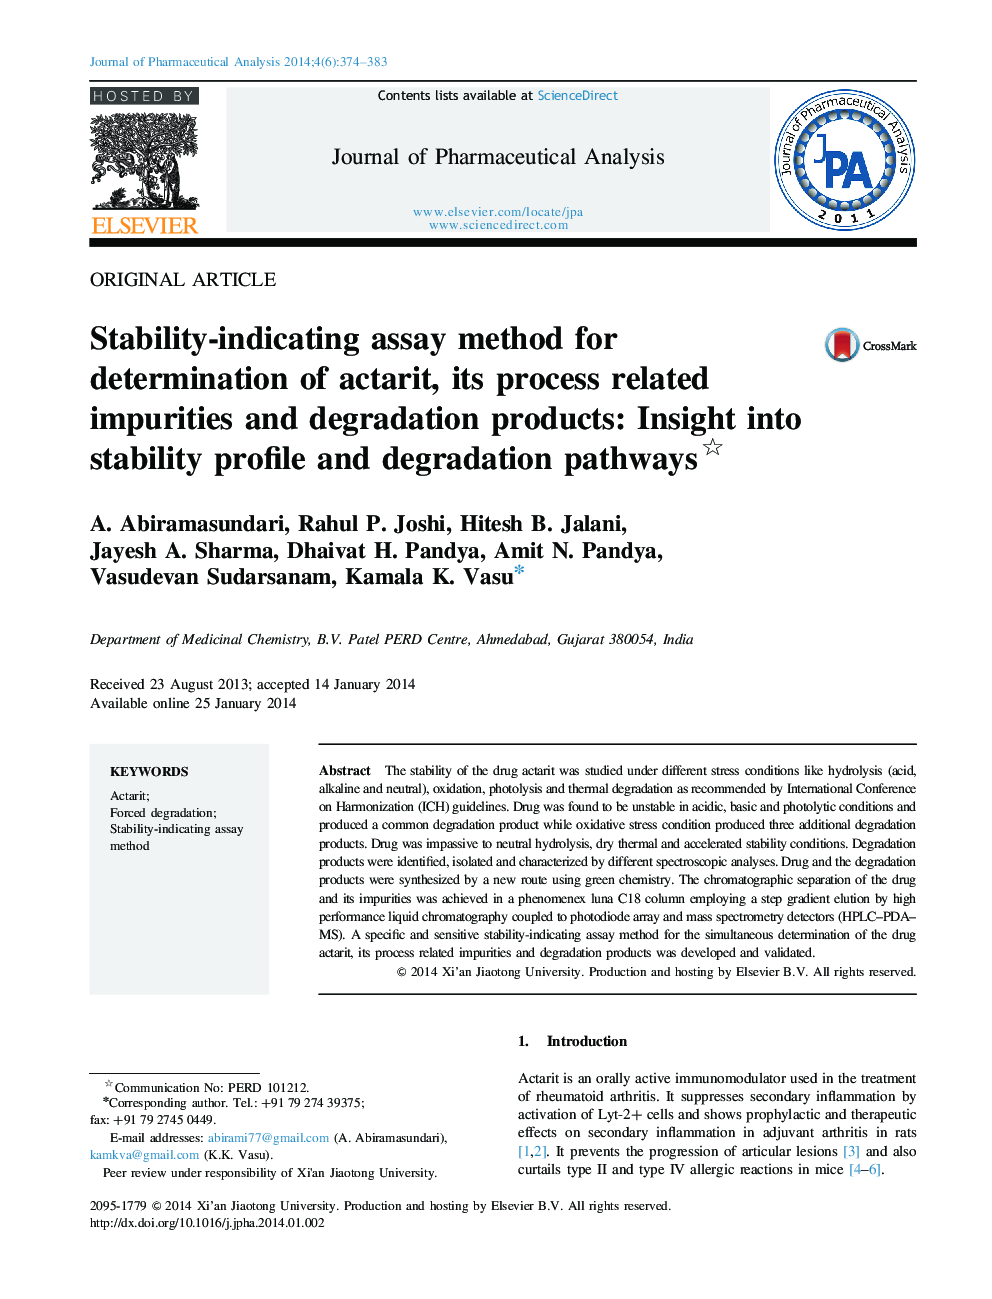 Stability-indicating assay method for determination of actarit, its process related impurities and degradation products: Insight into stability profile and degradation pathways